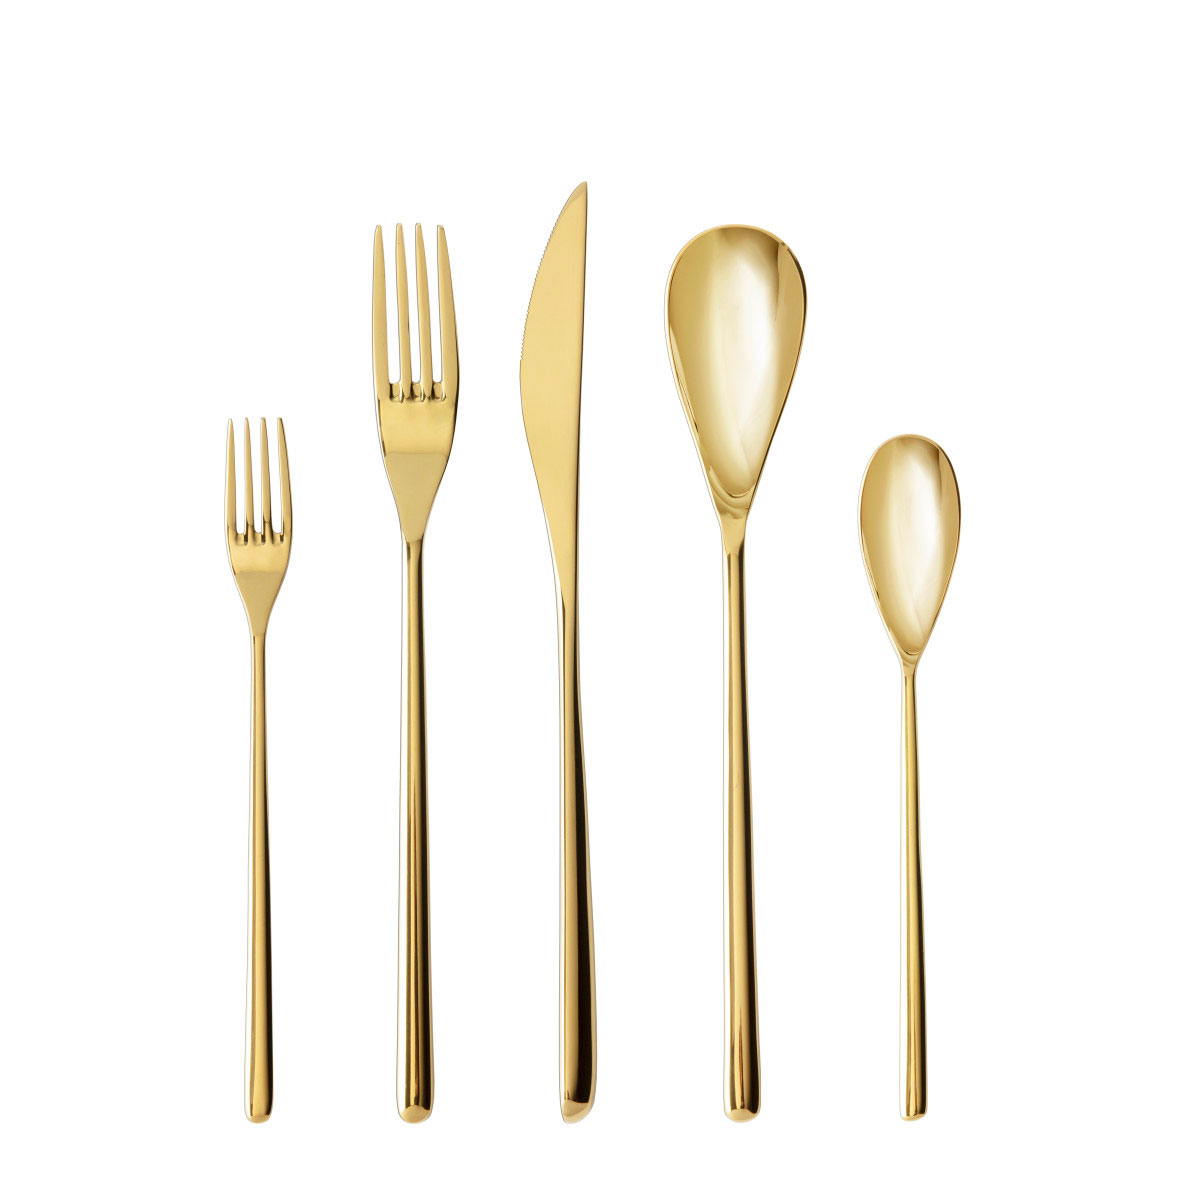 Fortessa Stainless Flatware Dragonfly Gold 20 Piece Place Setting